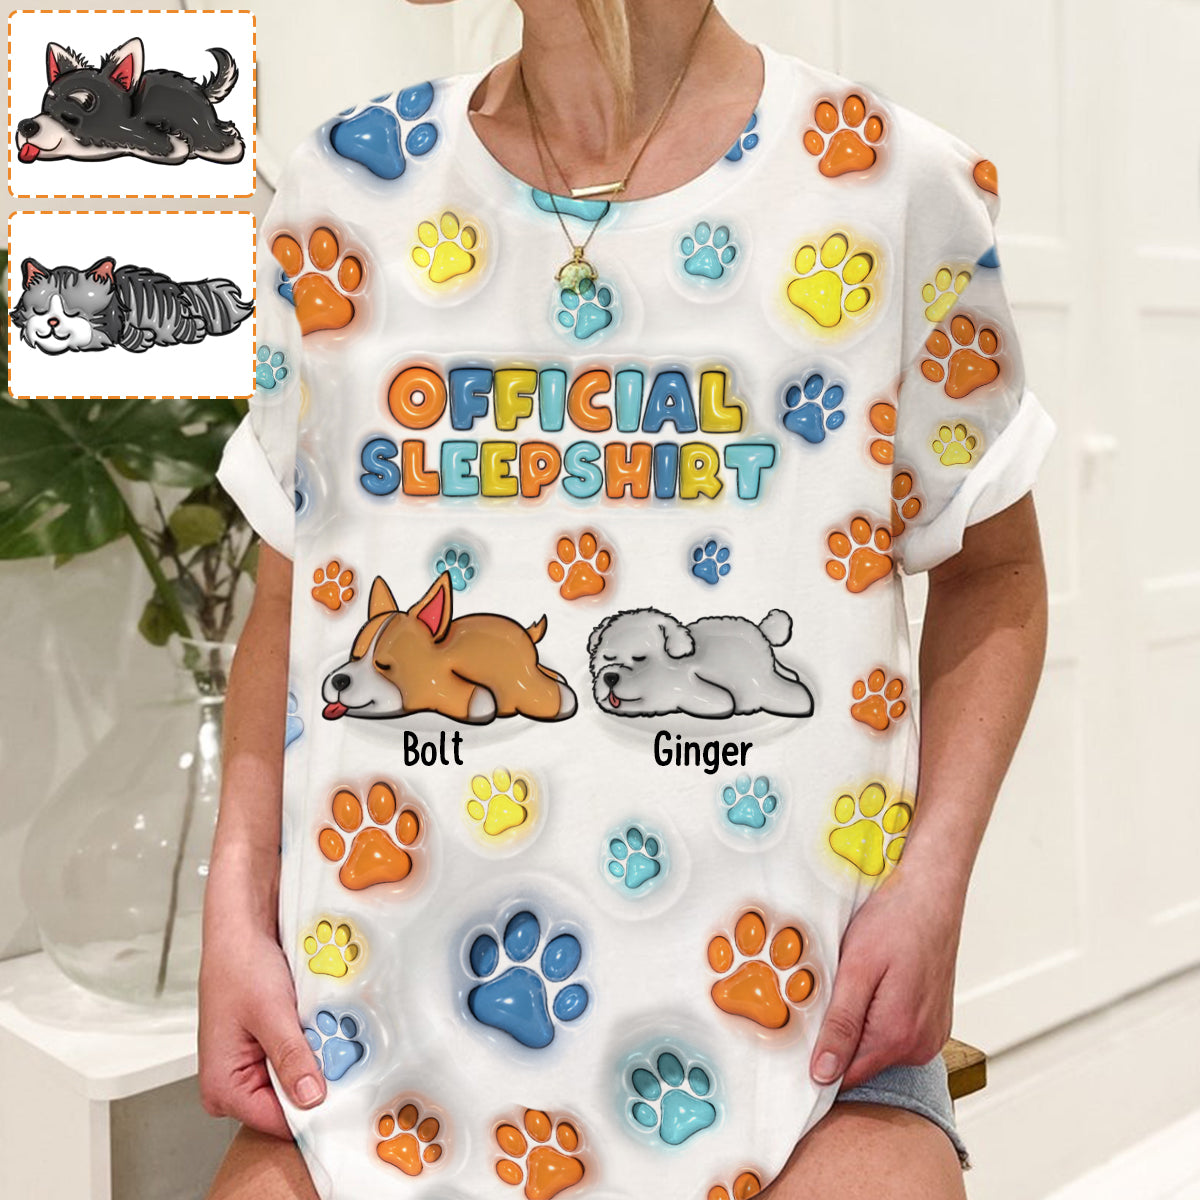 Discover Official Sleepshirt - Personalized Dog All Over Shirt